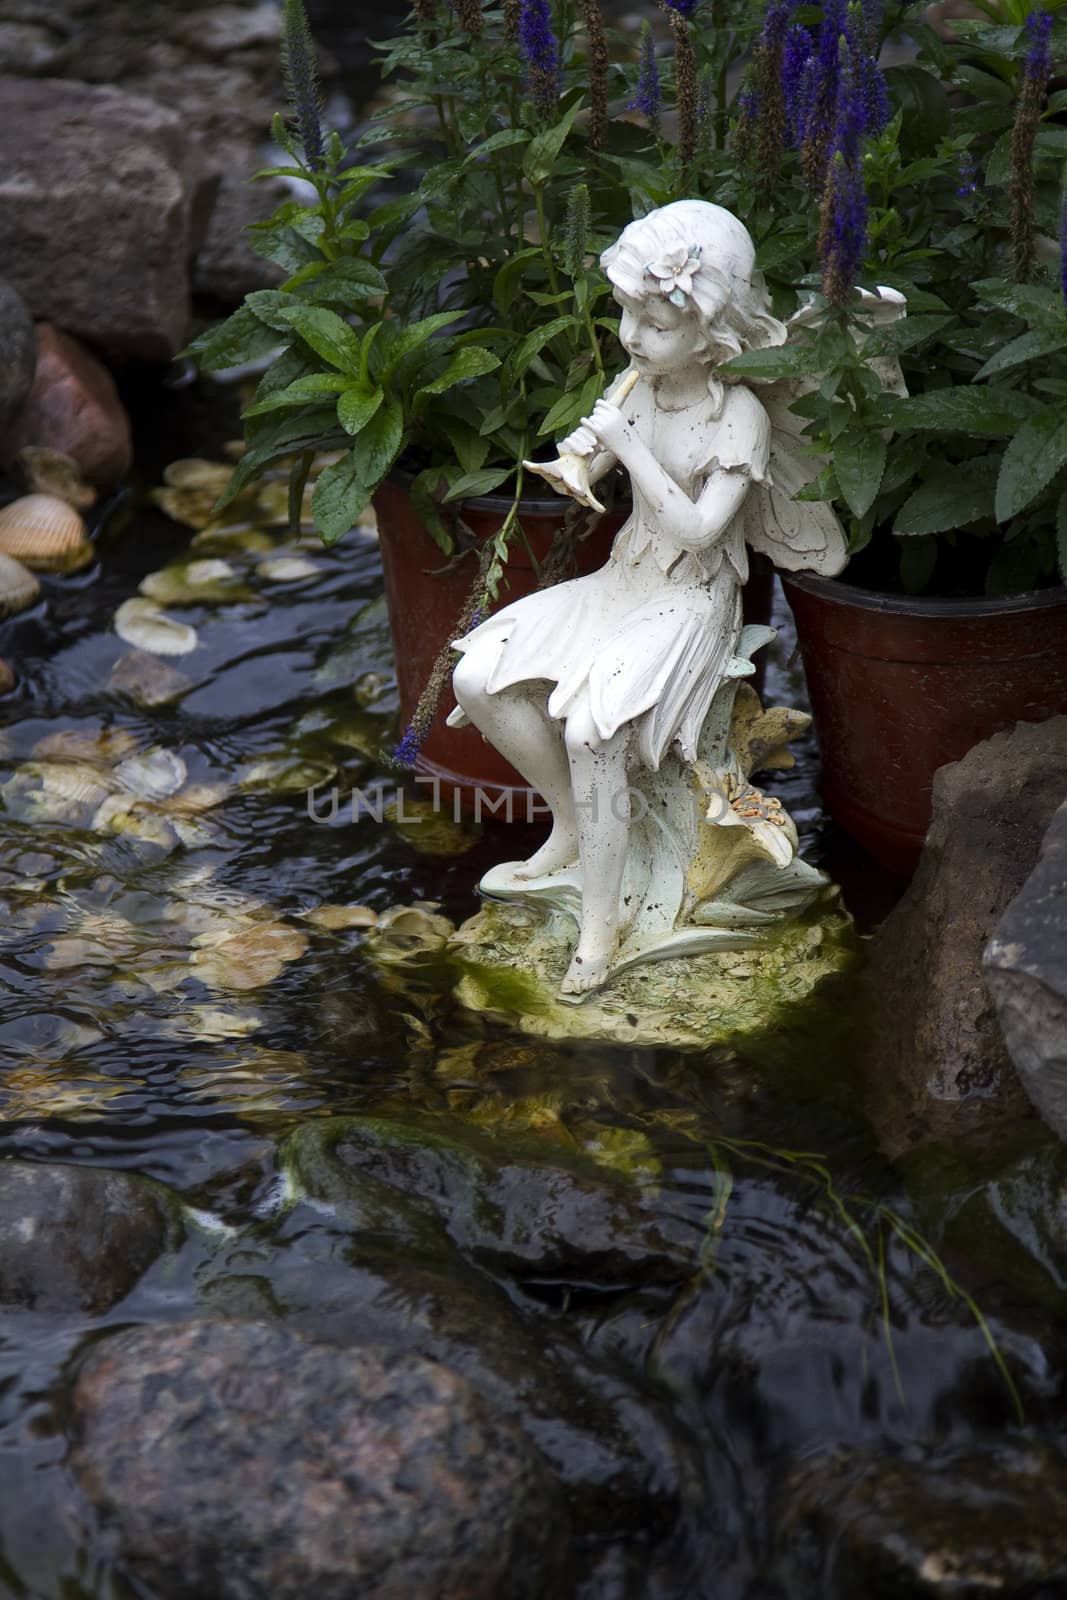 Water nymph statue playing the flute by a stream